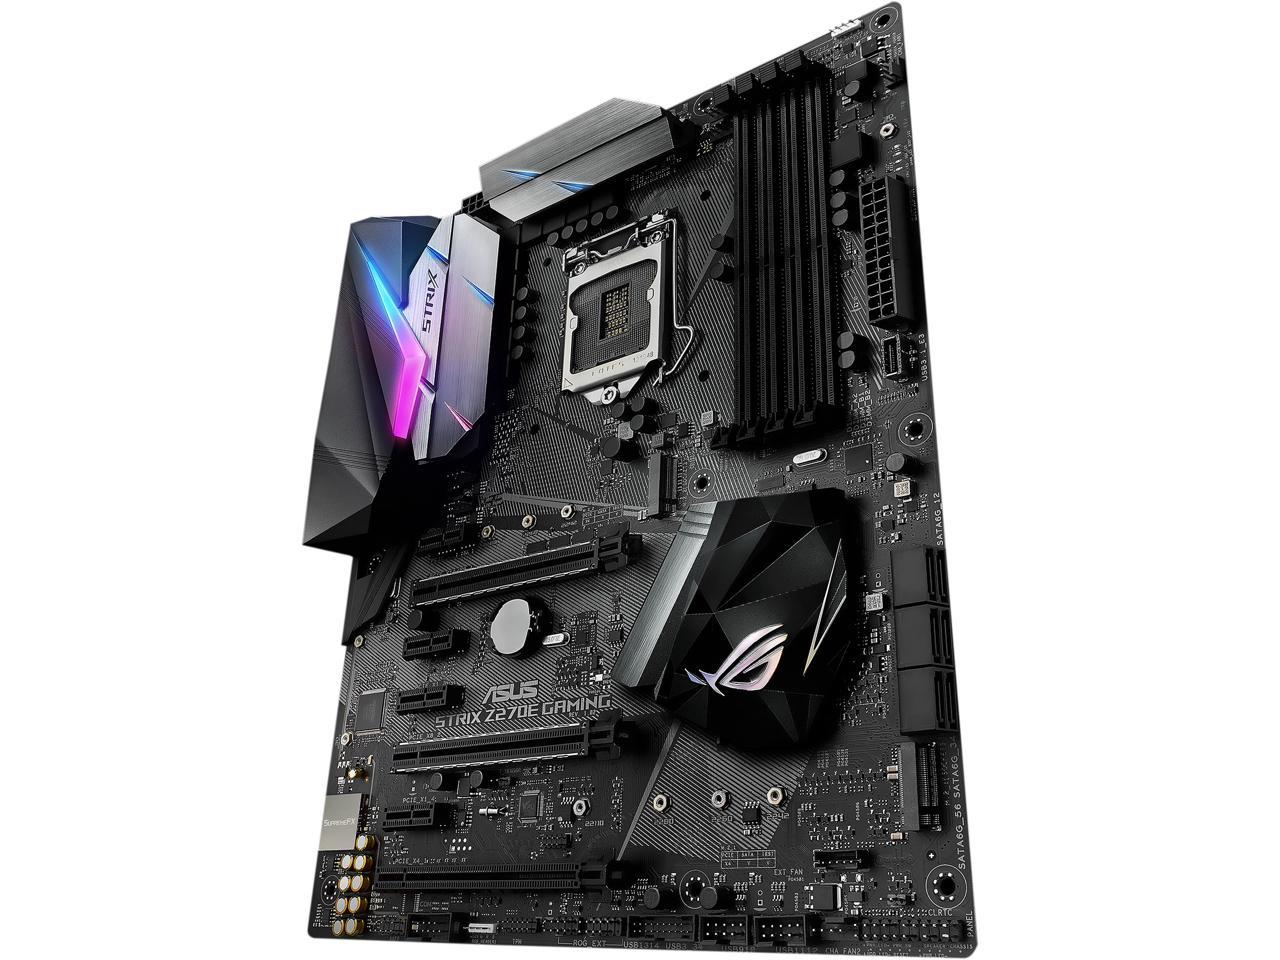 Used Very Good Asus Rog Strix Z270e Gaming Lga1151 Ddr4 Dp Hdmi Dvi M 2 Atx Motherboard With Onboard Ac Wi Fi And Usb 3 1 Newegg Com